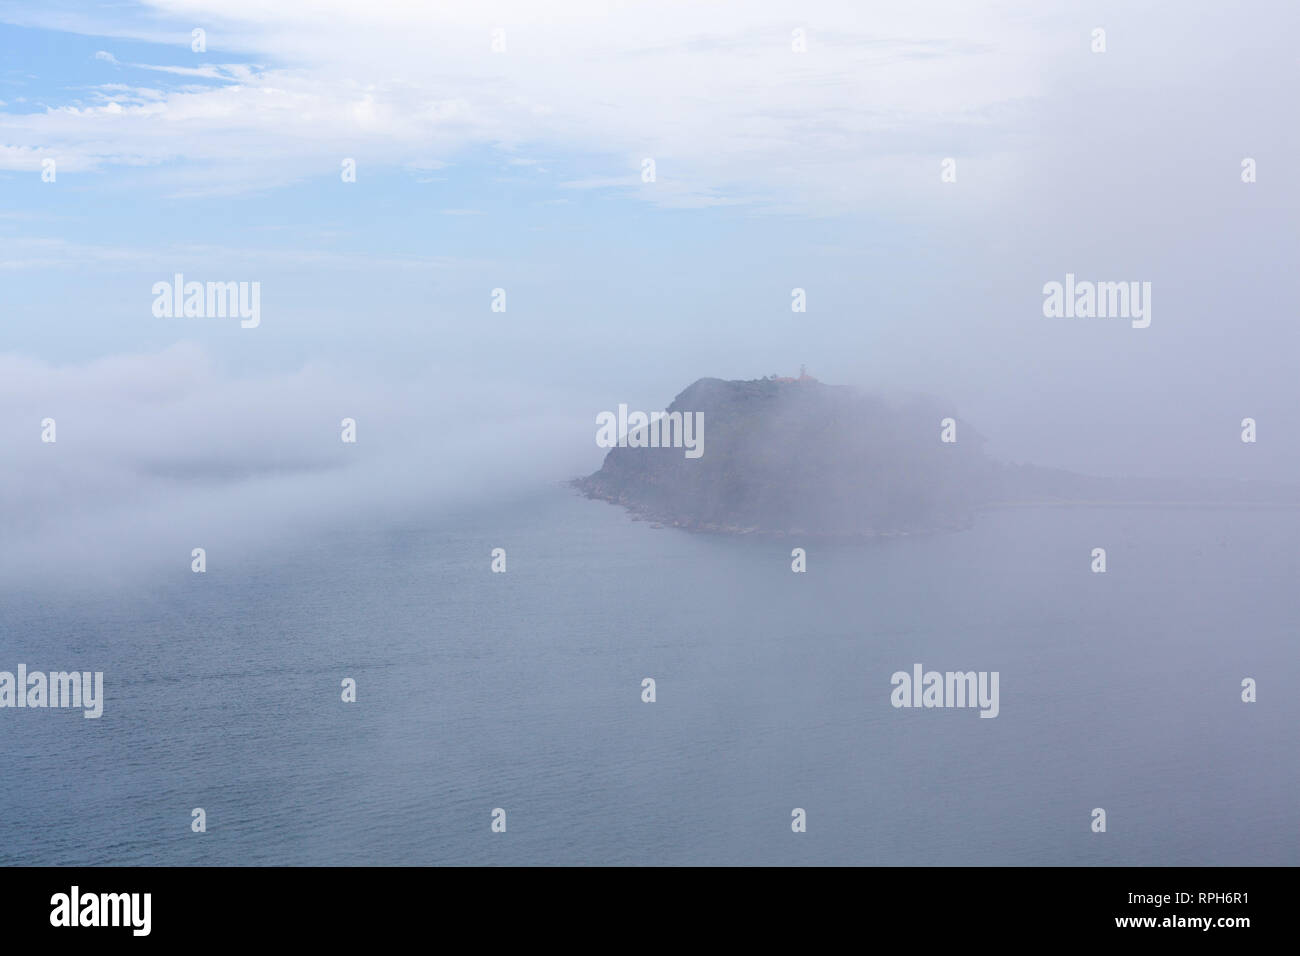 Small island with light house hidden under low mist and clouds over ocean Stock Photo